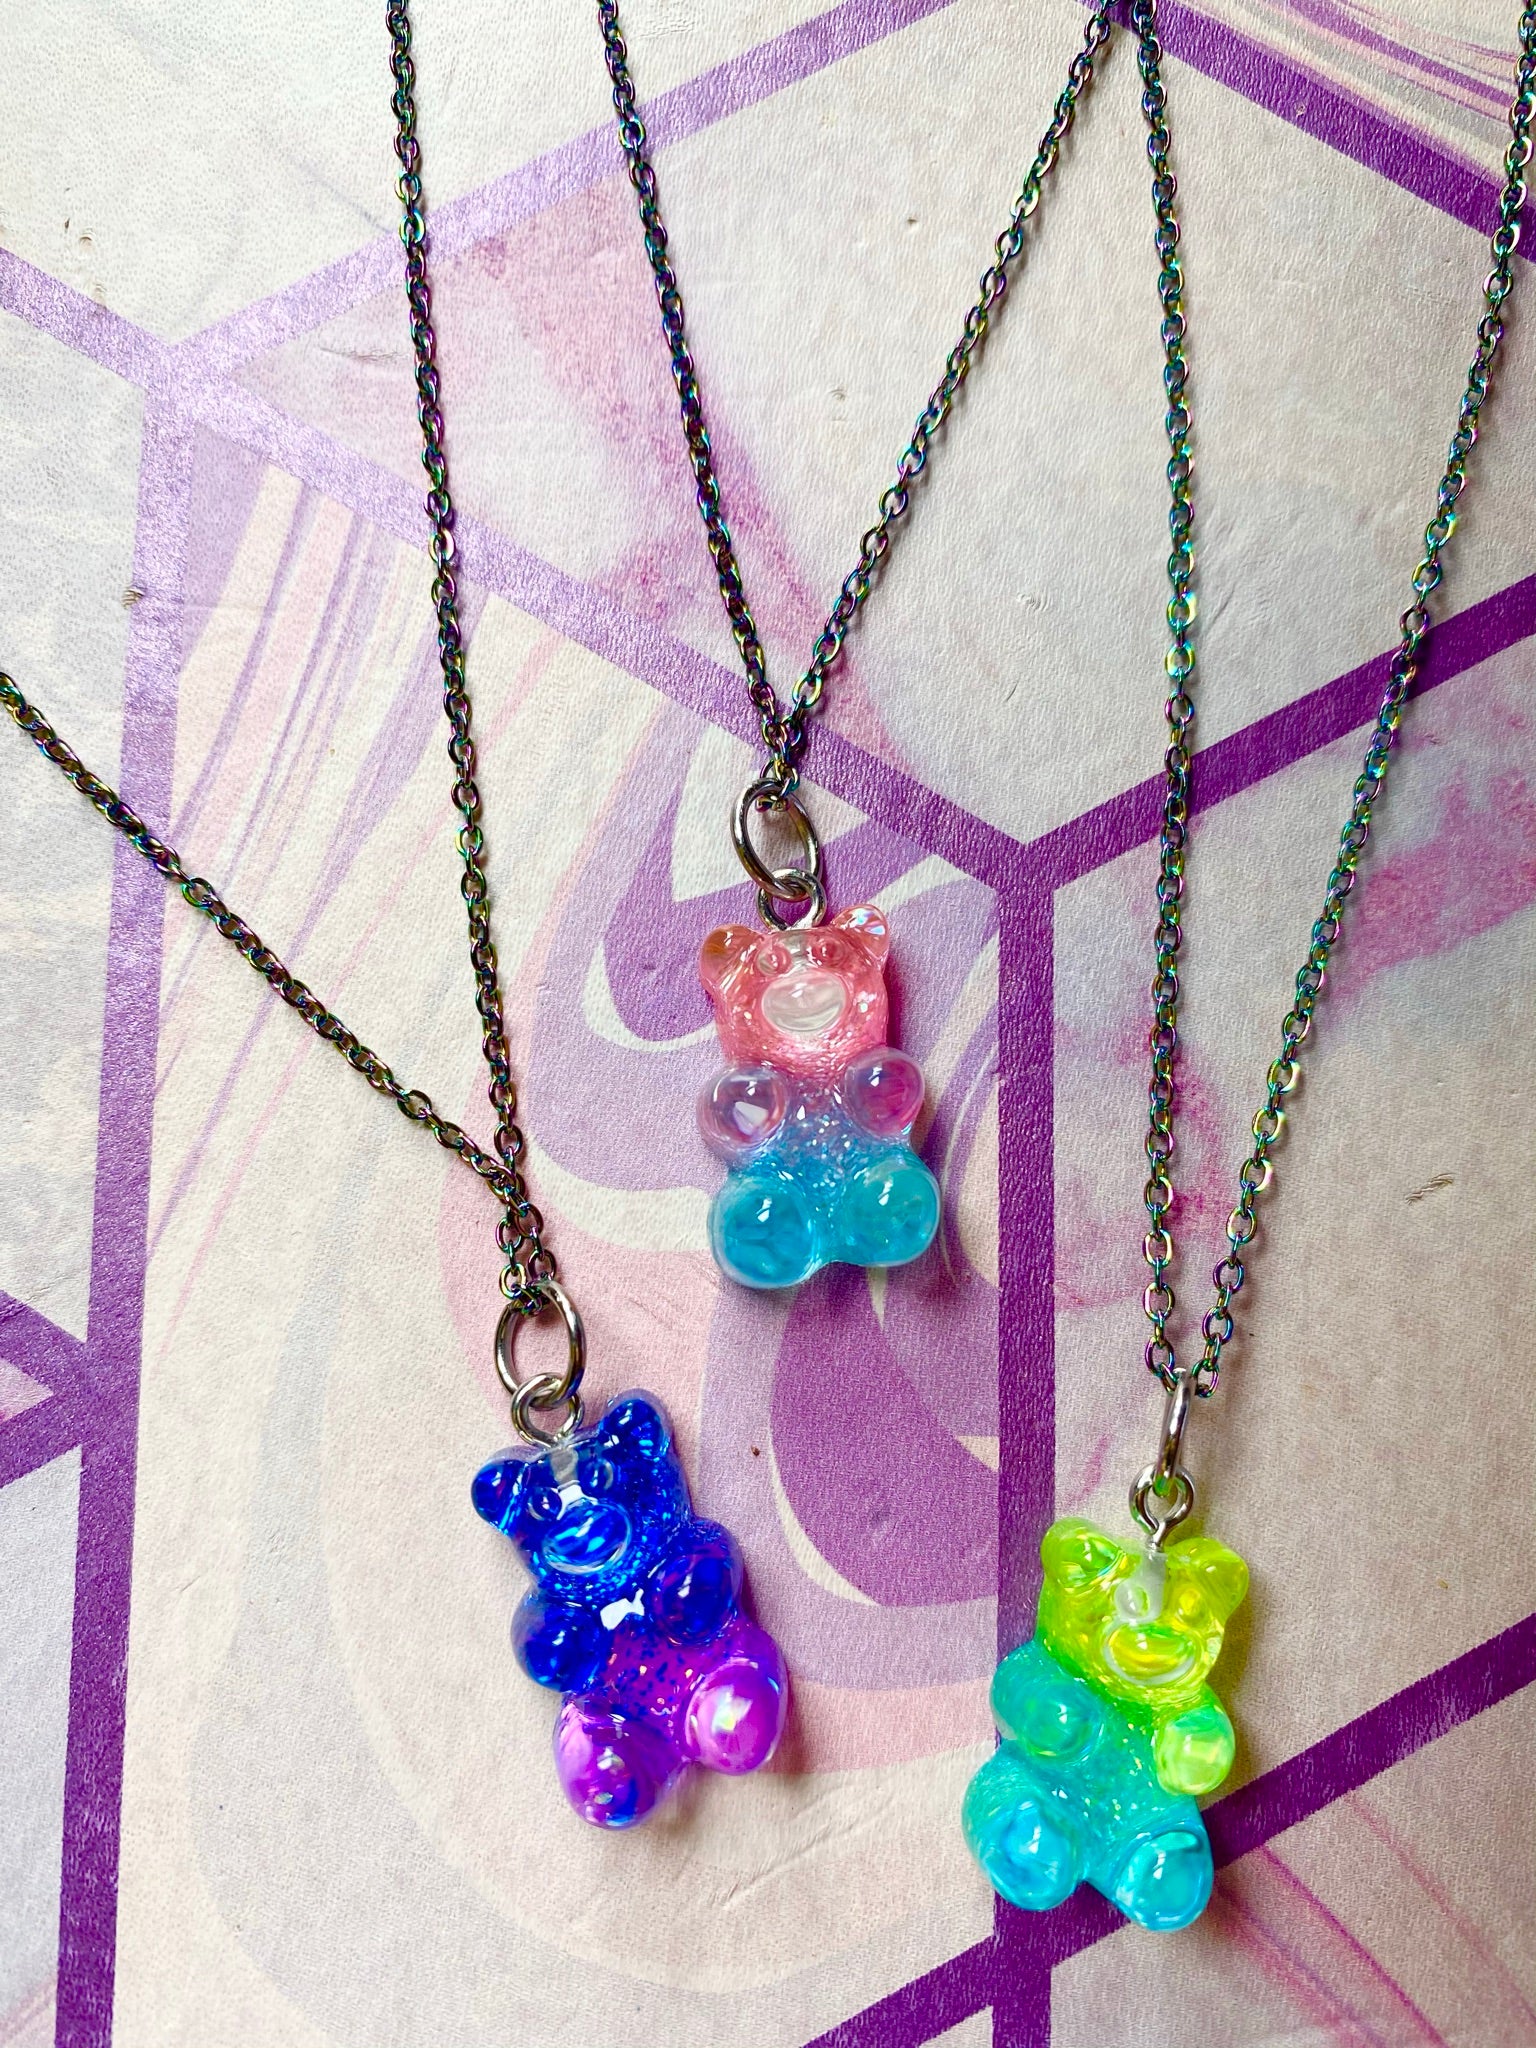 **SOLD** Rainbow charm necklace